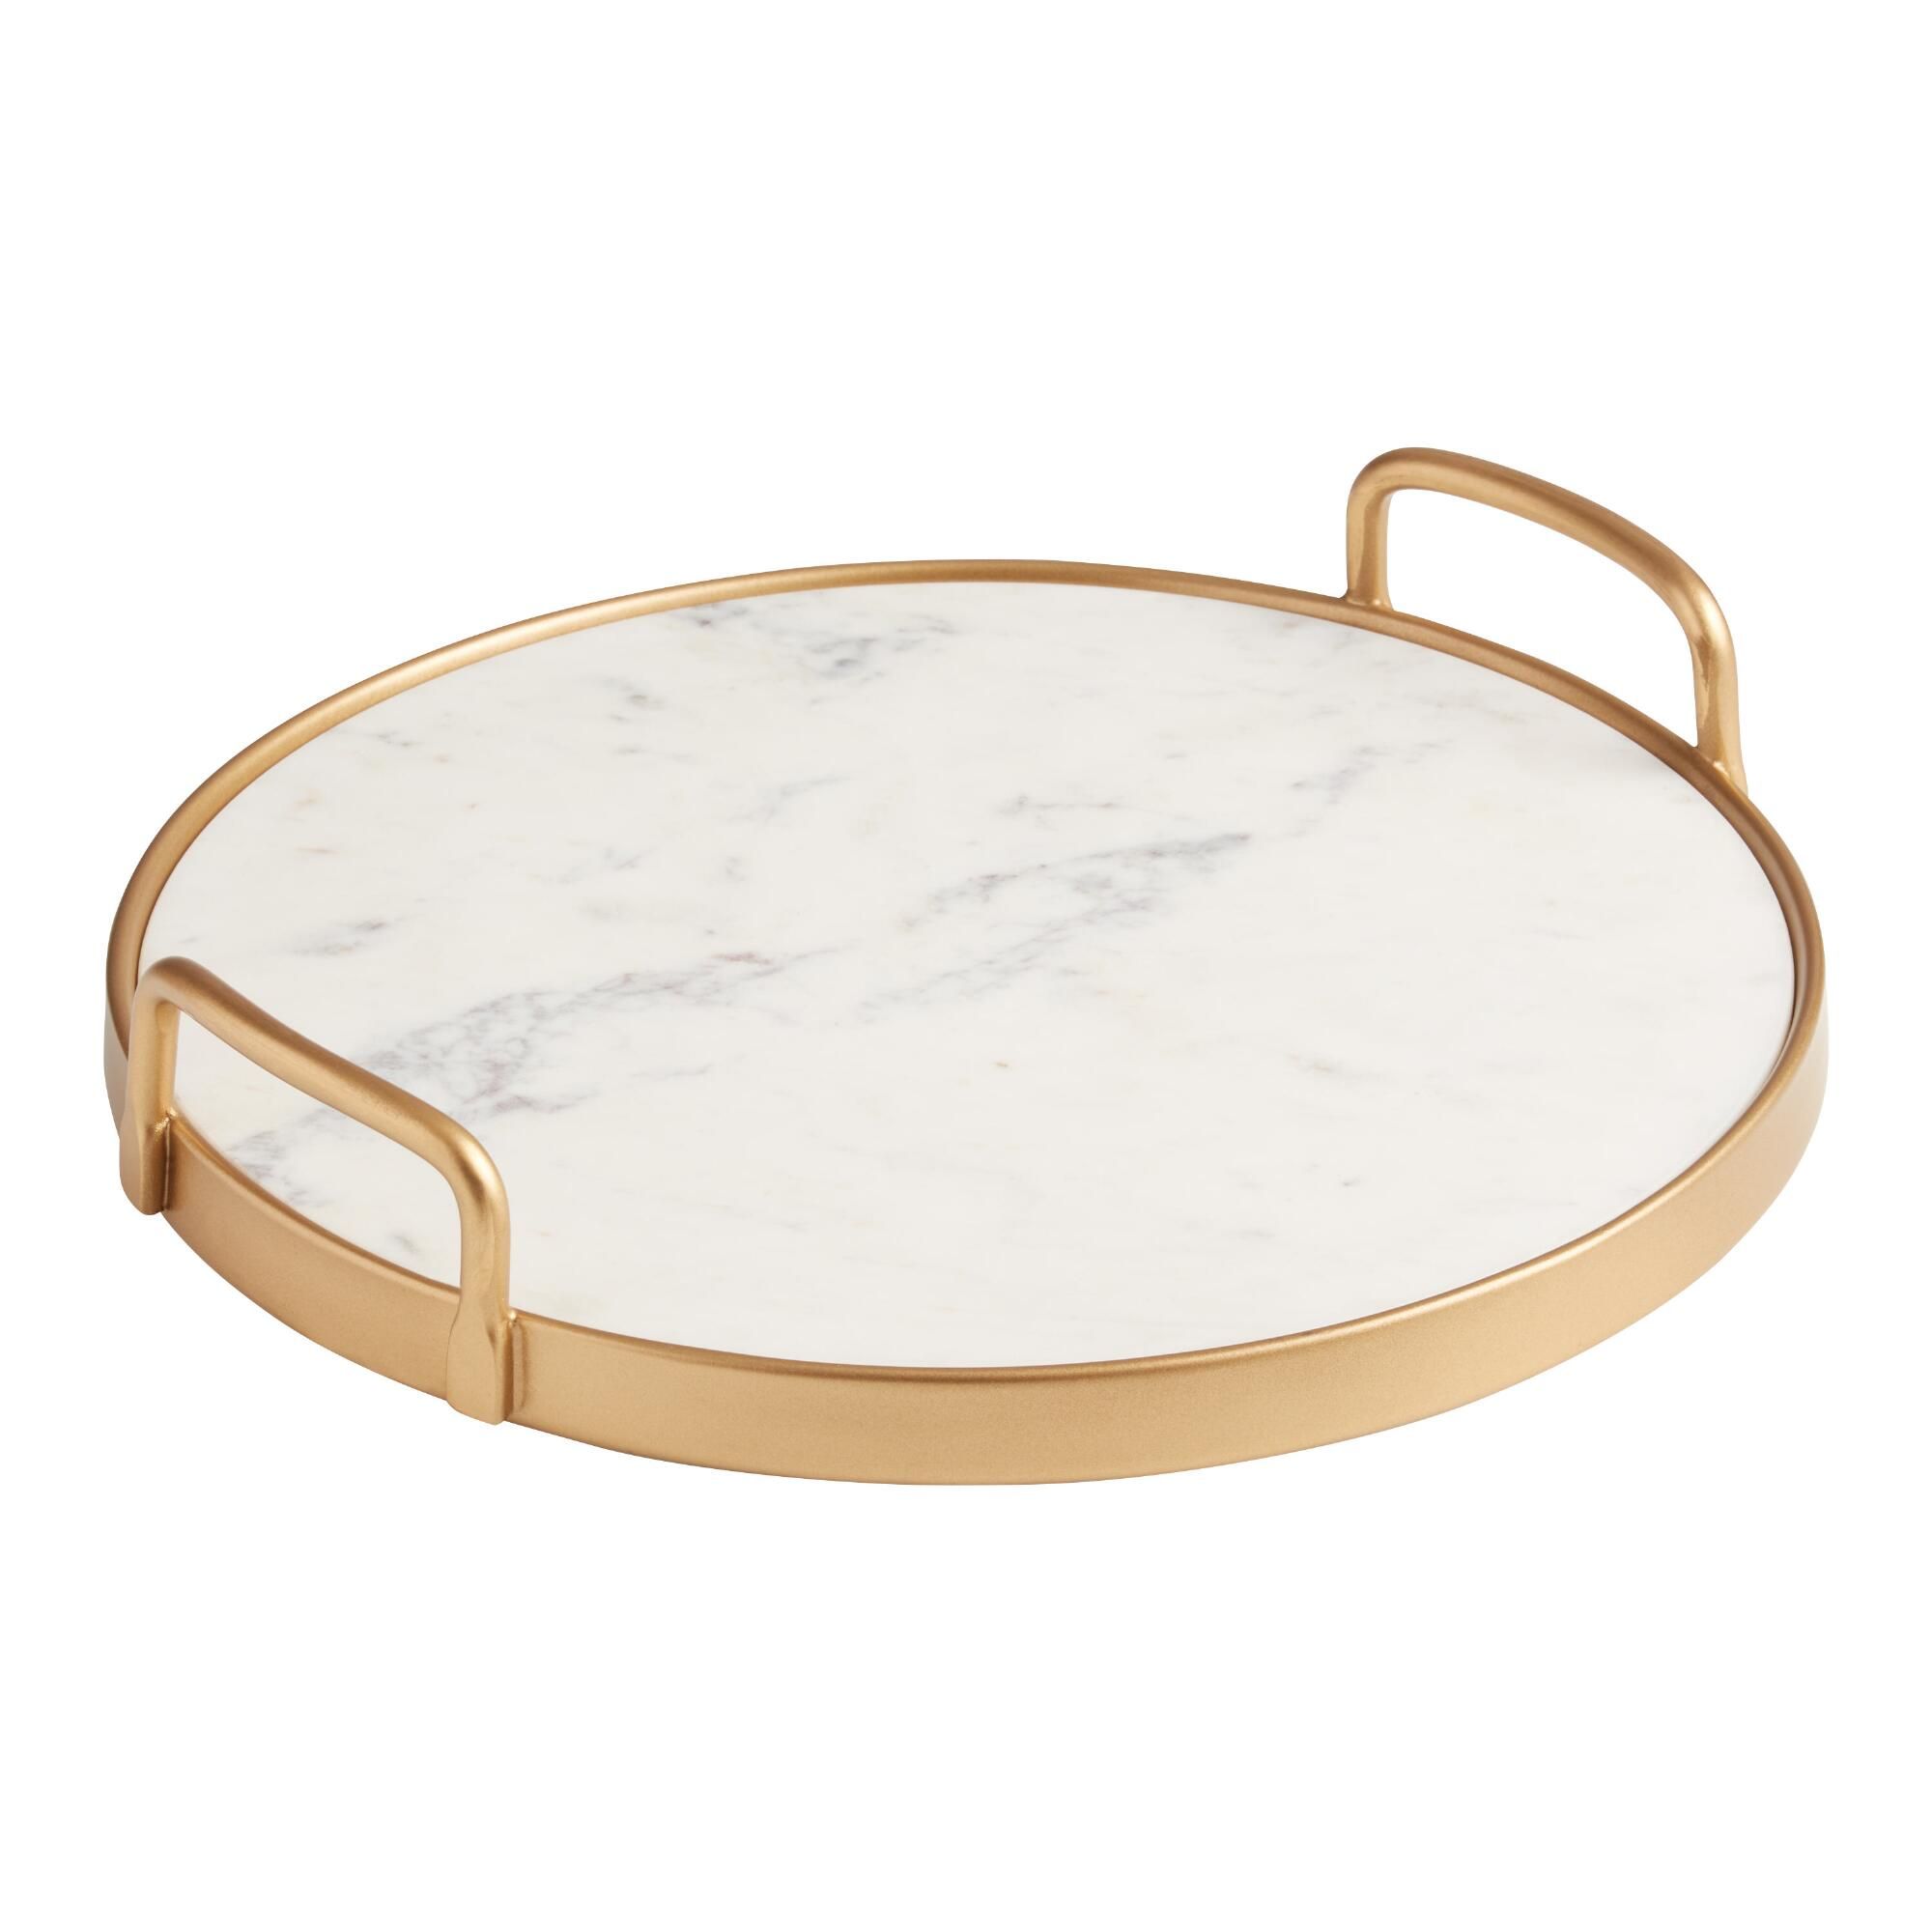 Marble and Gold Tray by World Market | World Market